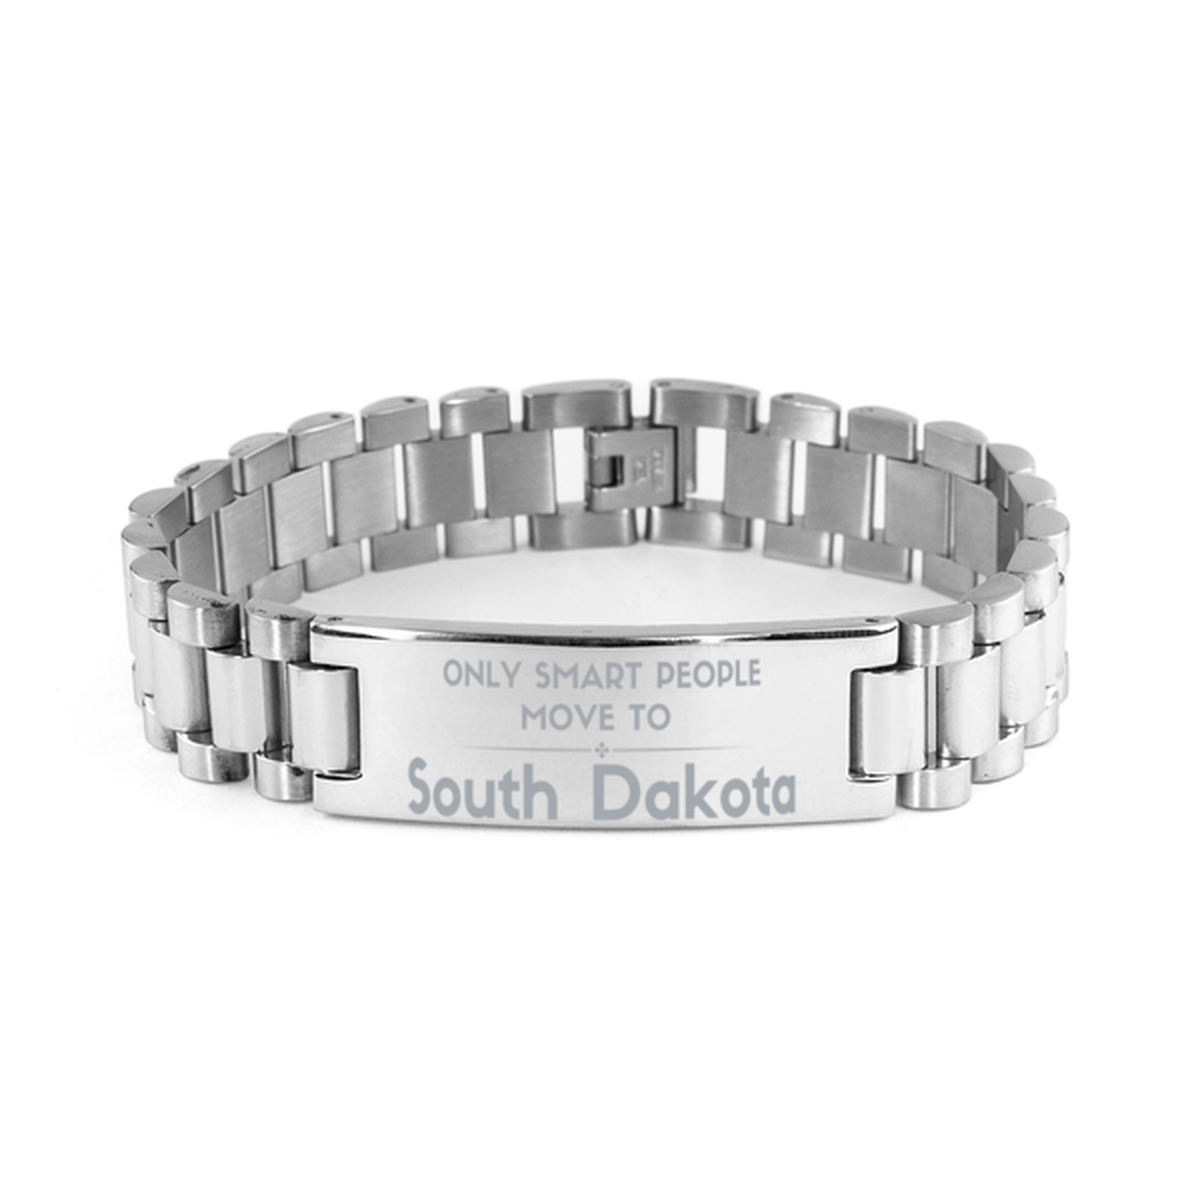 Only smart people move to South Dakota Ladder Stainless Steel Bracelet, Gag Gifts For South Dakota, Move to South Dakota Gifts for Friends Coworker Funny Saying Quote